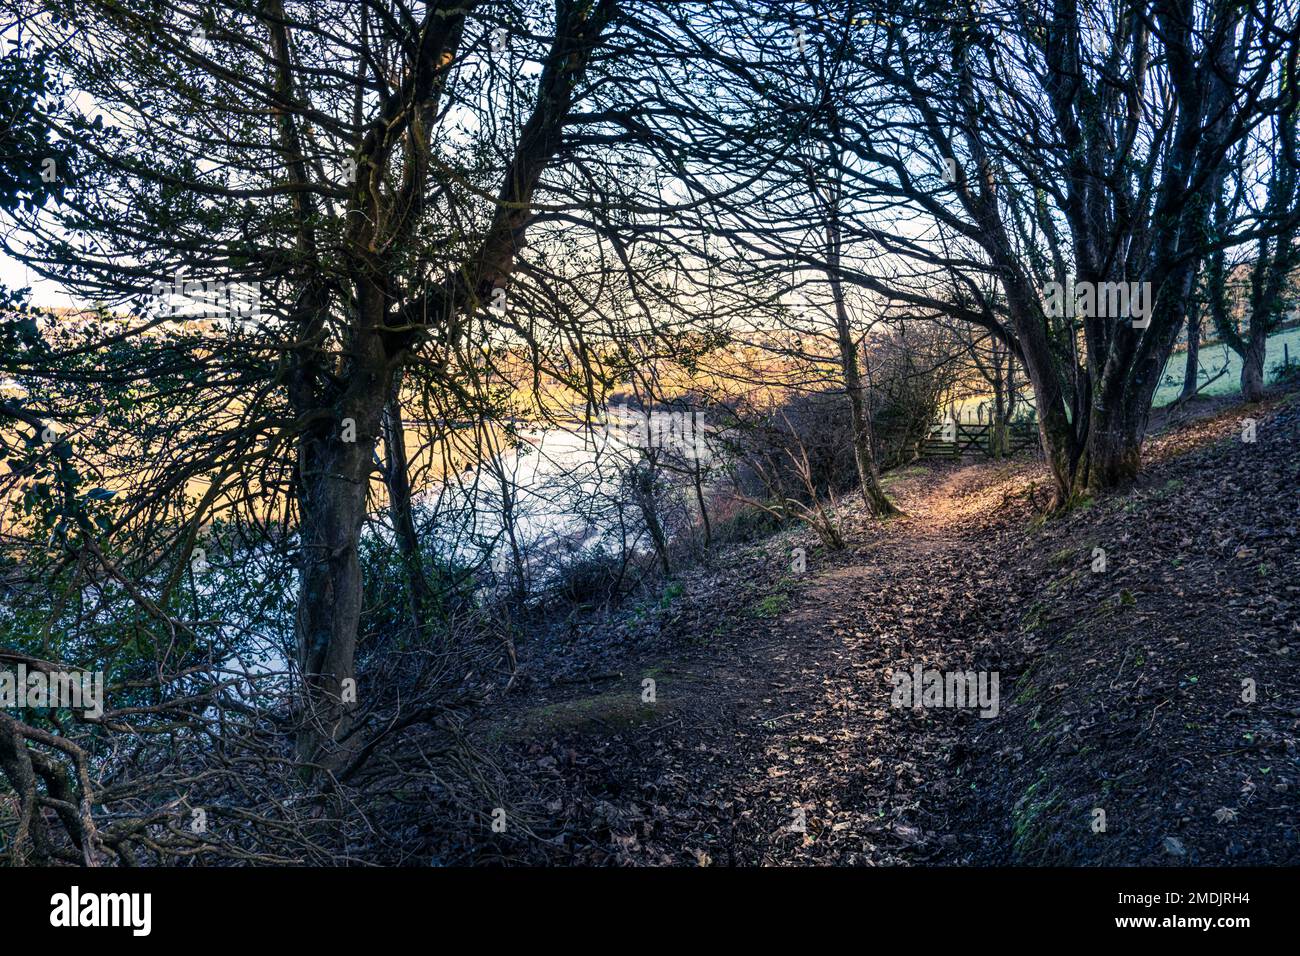 A footpath through woodland overlooking the Gannel River in Newquay in Cornwall in the UK. Stock Photo